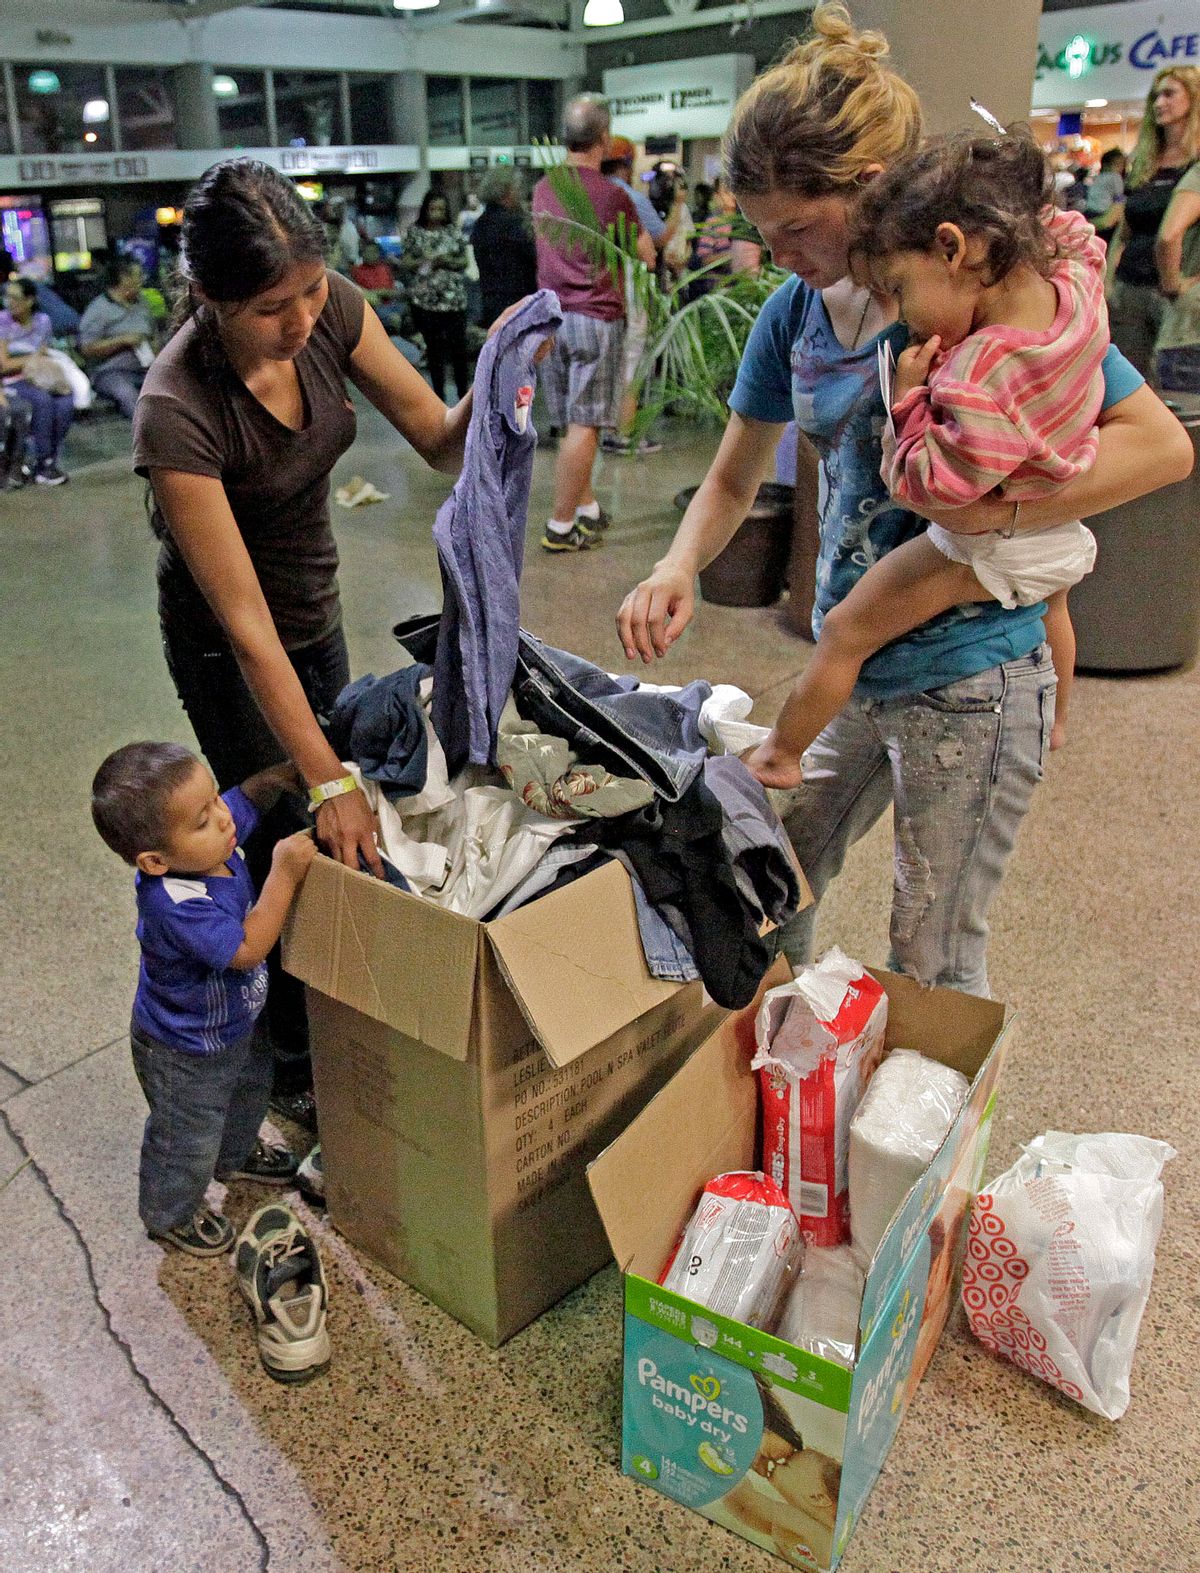 Women and children look through a box of cloths that were donated by volunteers at the Greyhound bus terminal, Thursday, May 29, 2014 in Phoenix.  About 400 mostly Central American women and children caught crossing from Mexico into south Texas were flown to Arizona this weekend after border agents there ran out of space and resources.  Officials then dropped hundreds of them off at Phoenix and Tucson Greyhound stations, overwhelming the stations and humanitarian groups who were trying to help. (AP Photo/Rick Scuteri) (AP)